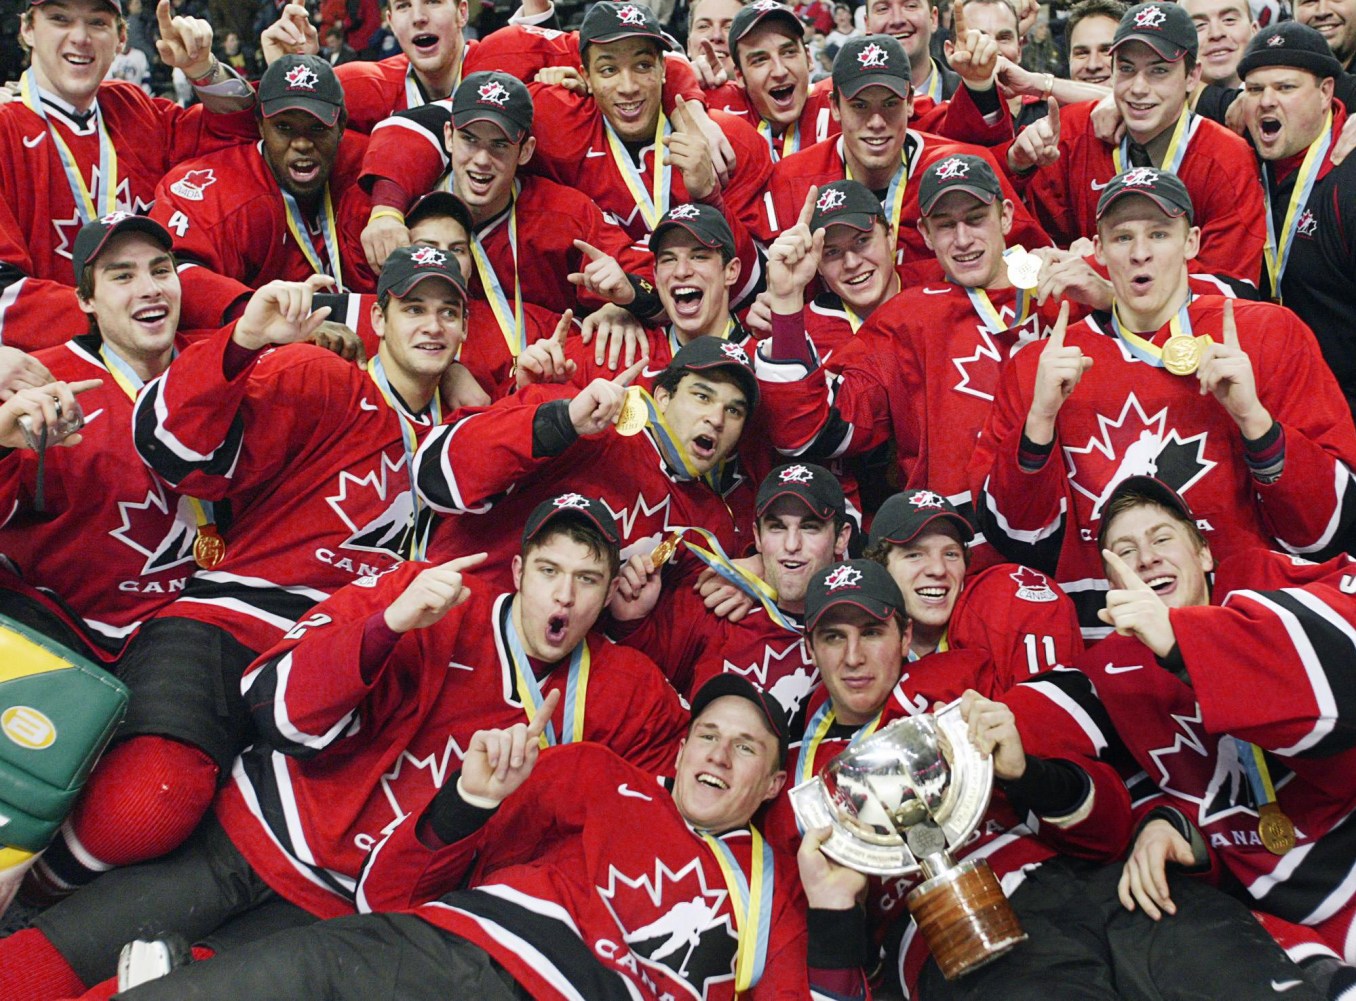 The team poses with the trophy after winning gold at the 2005 World Juniors (Photo: CP)